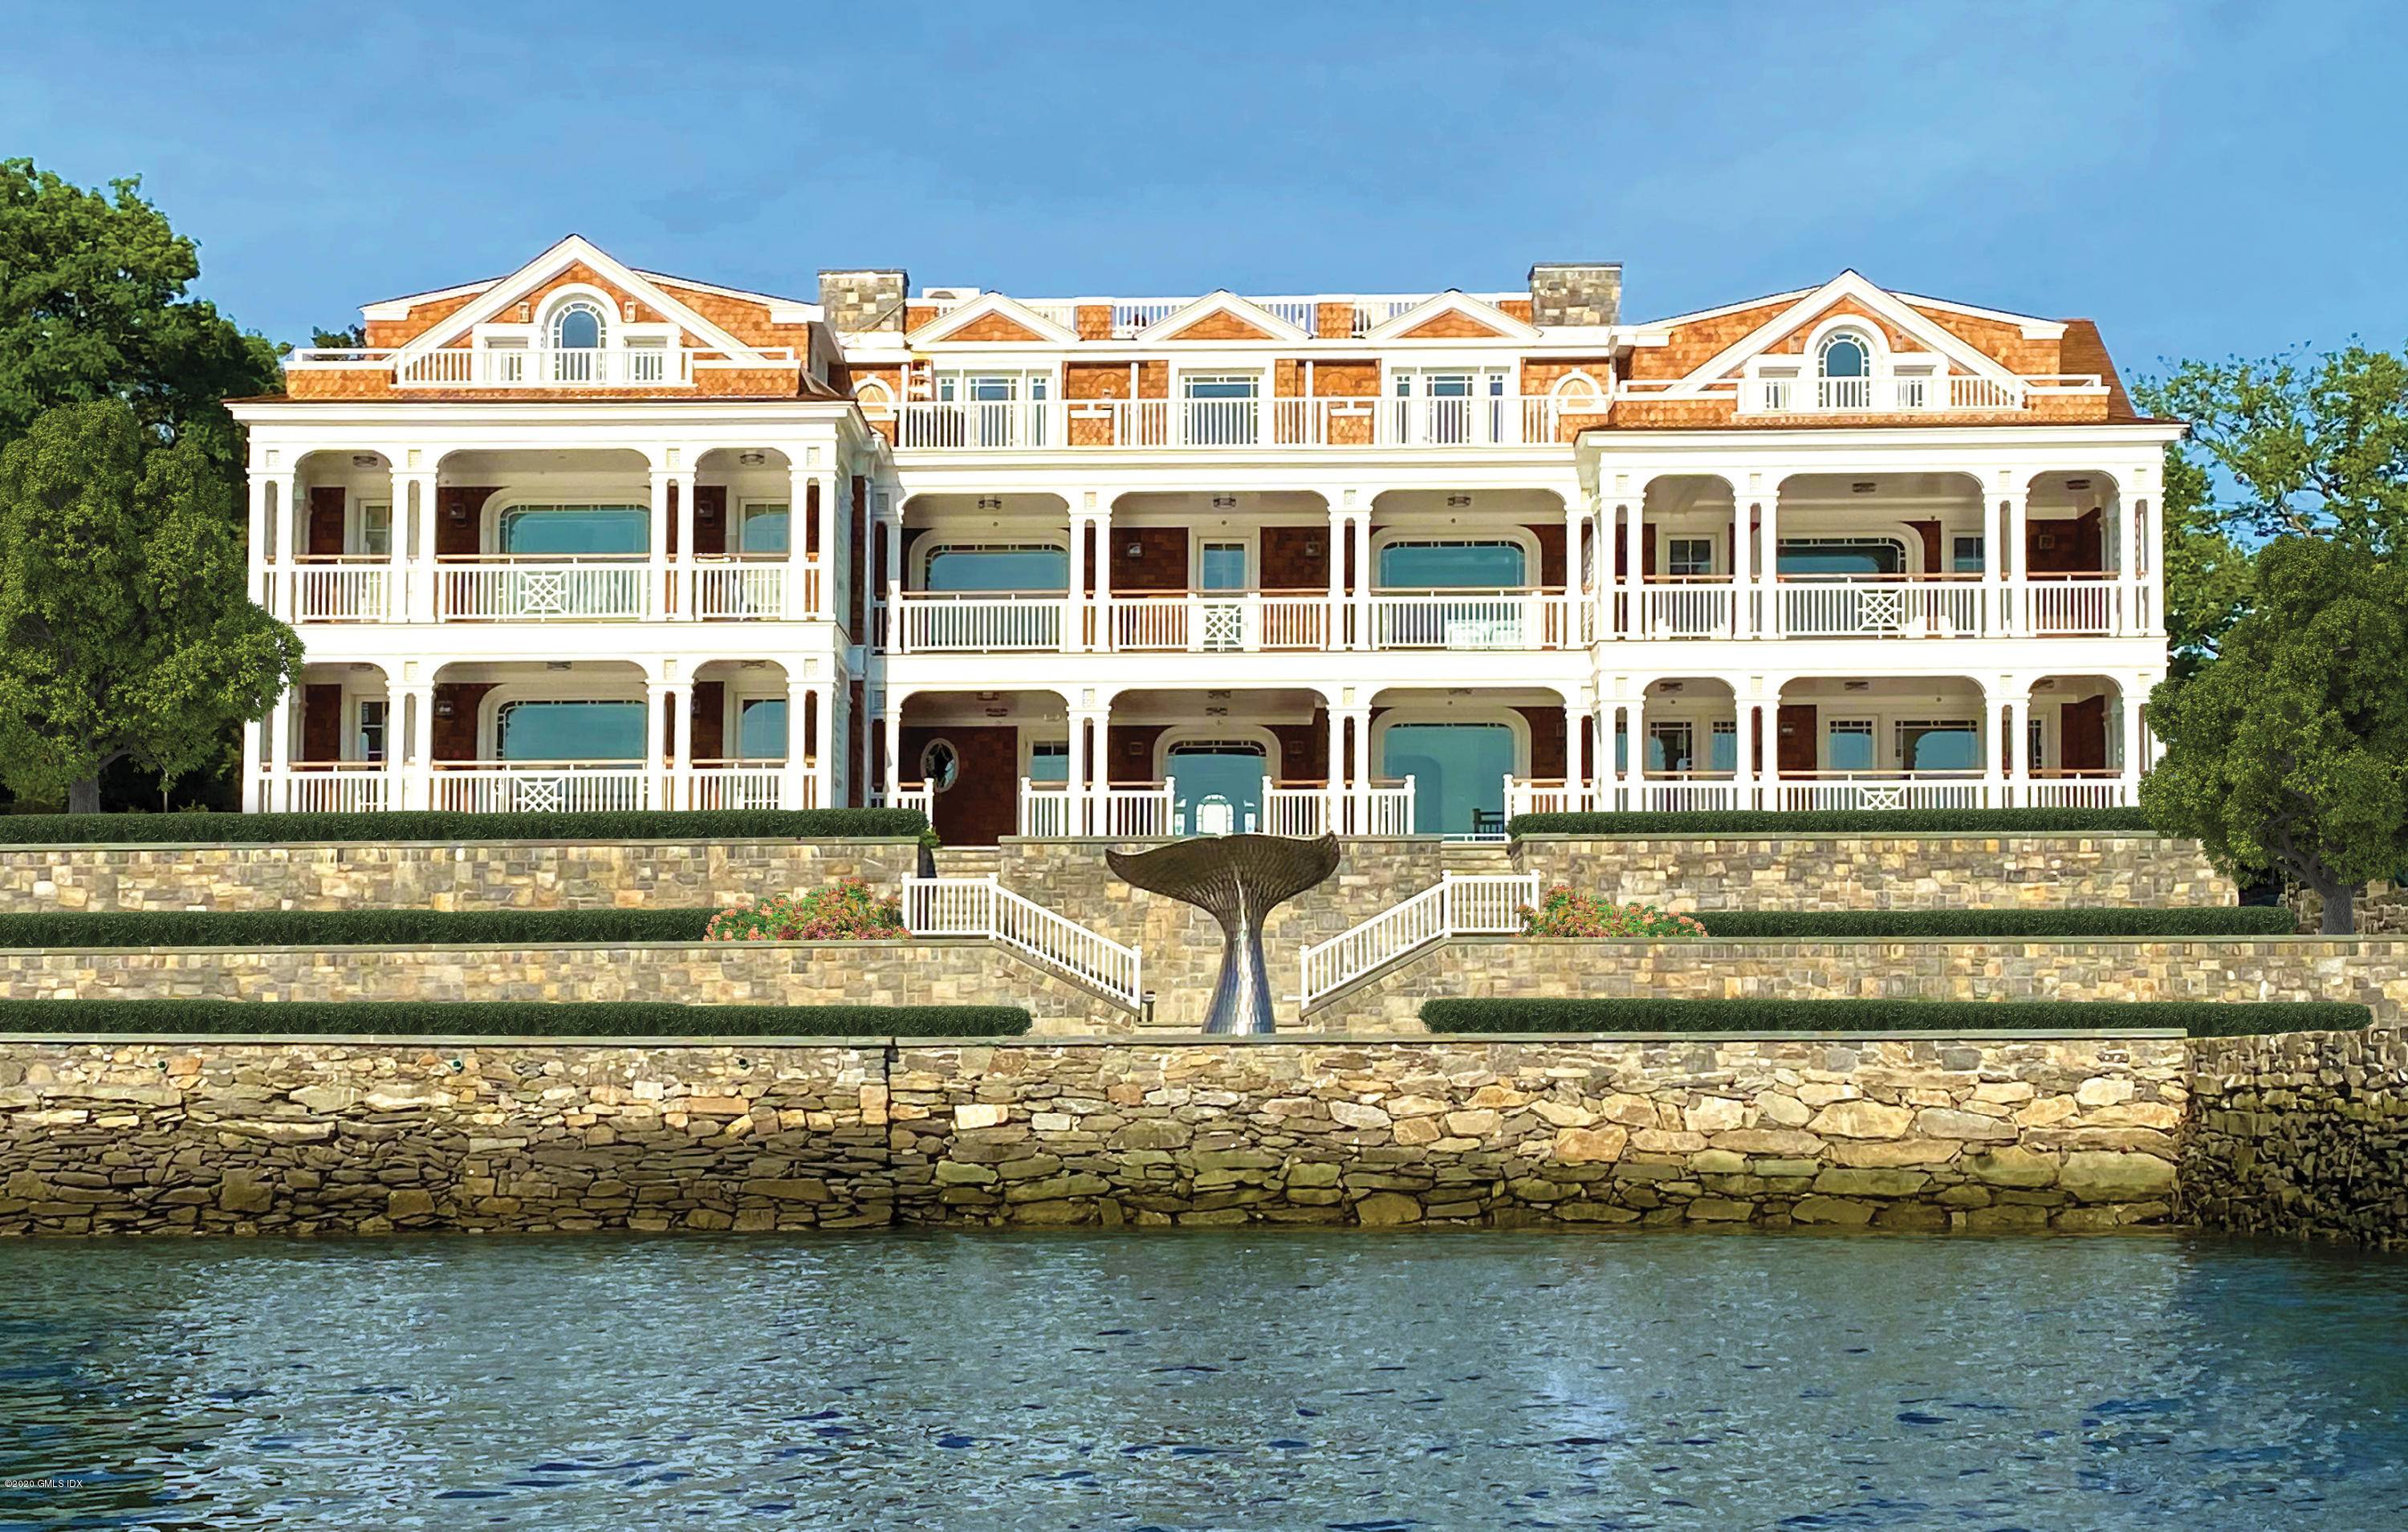 Rare Direct Waterfront Boutique Condominium ''The Corsair'' offers breathtaking views, concierge luxury, a Hinckley timeshare, waterside pool, private dock deep water mooring option on Greenwich Harbor.